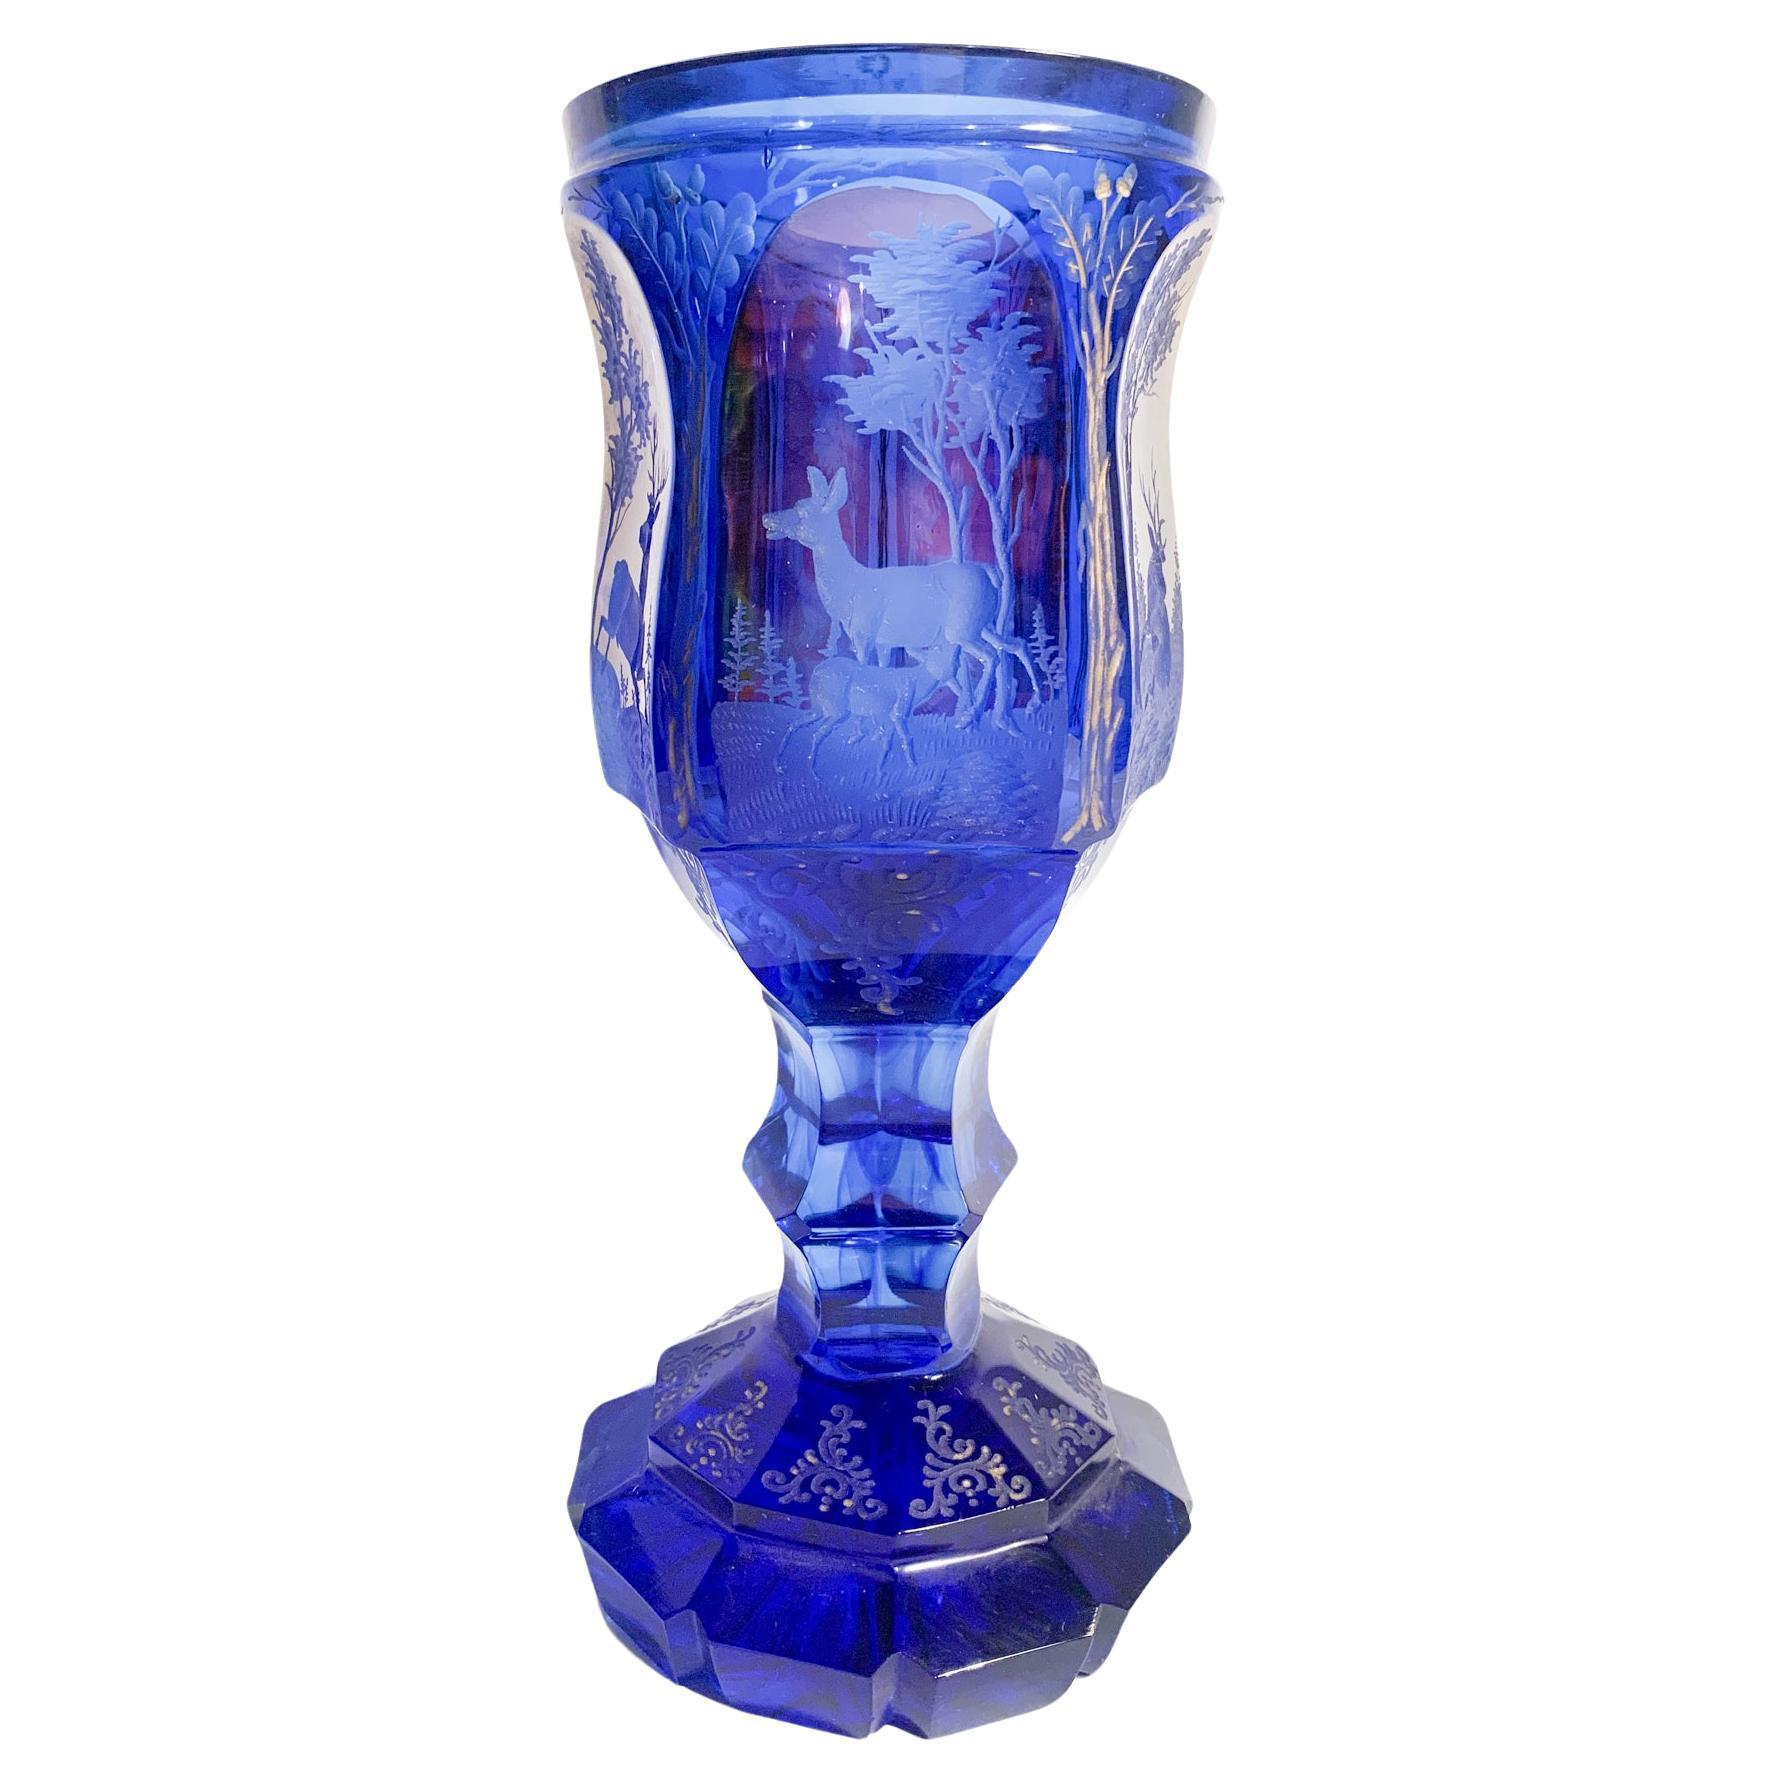 Biedermeier Blue and Red Crystal Glass with Acid Decoration from the 1800s